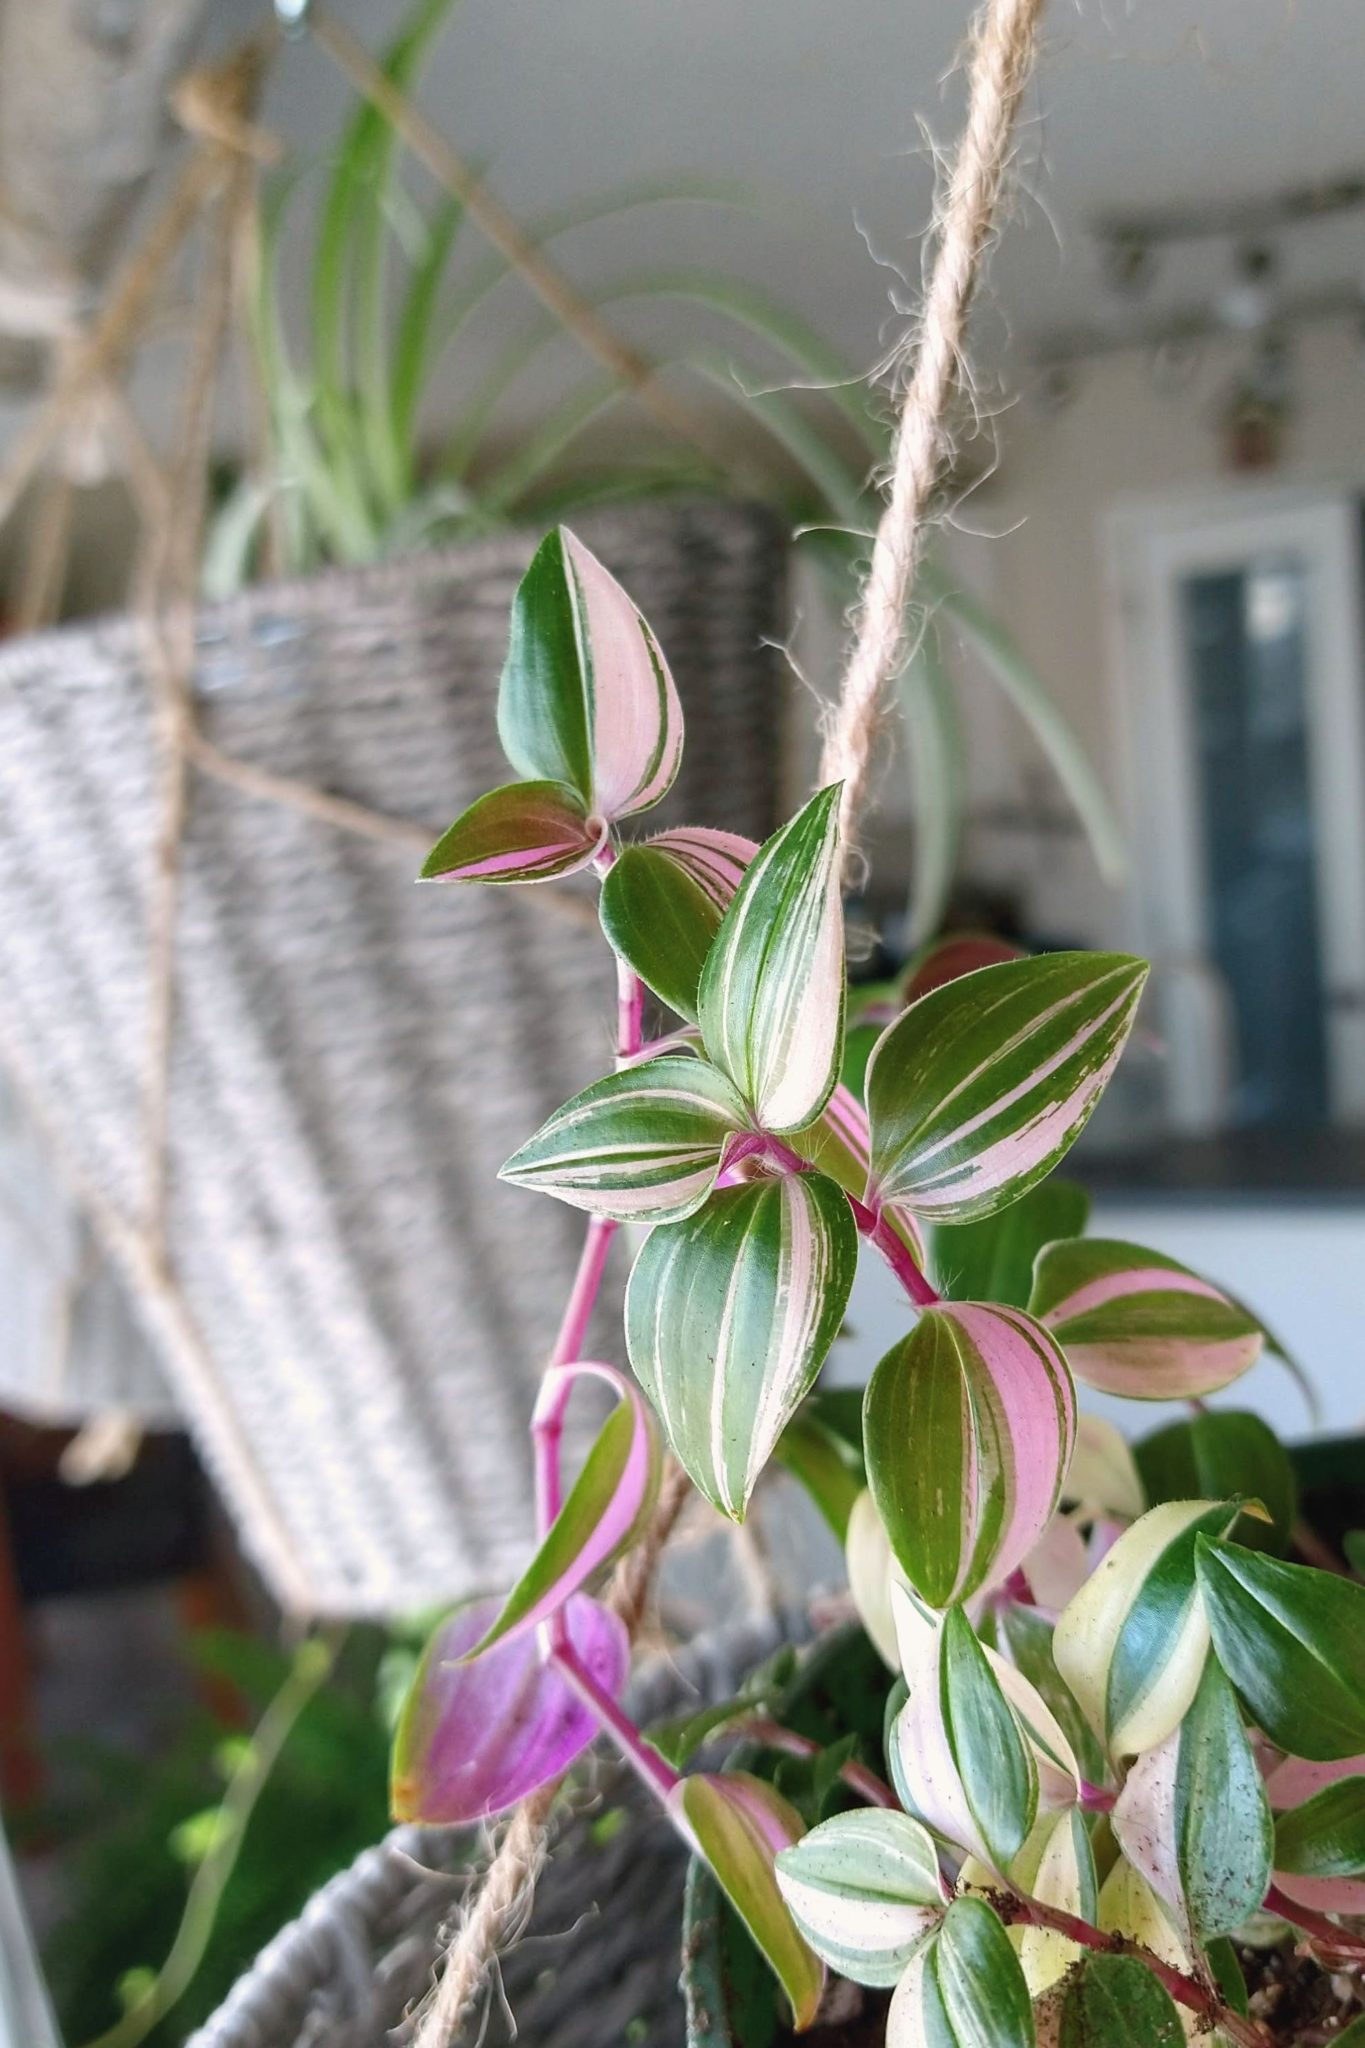 Easy Houseplants That Aren't Succulents! - Near to Nirvana